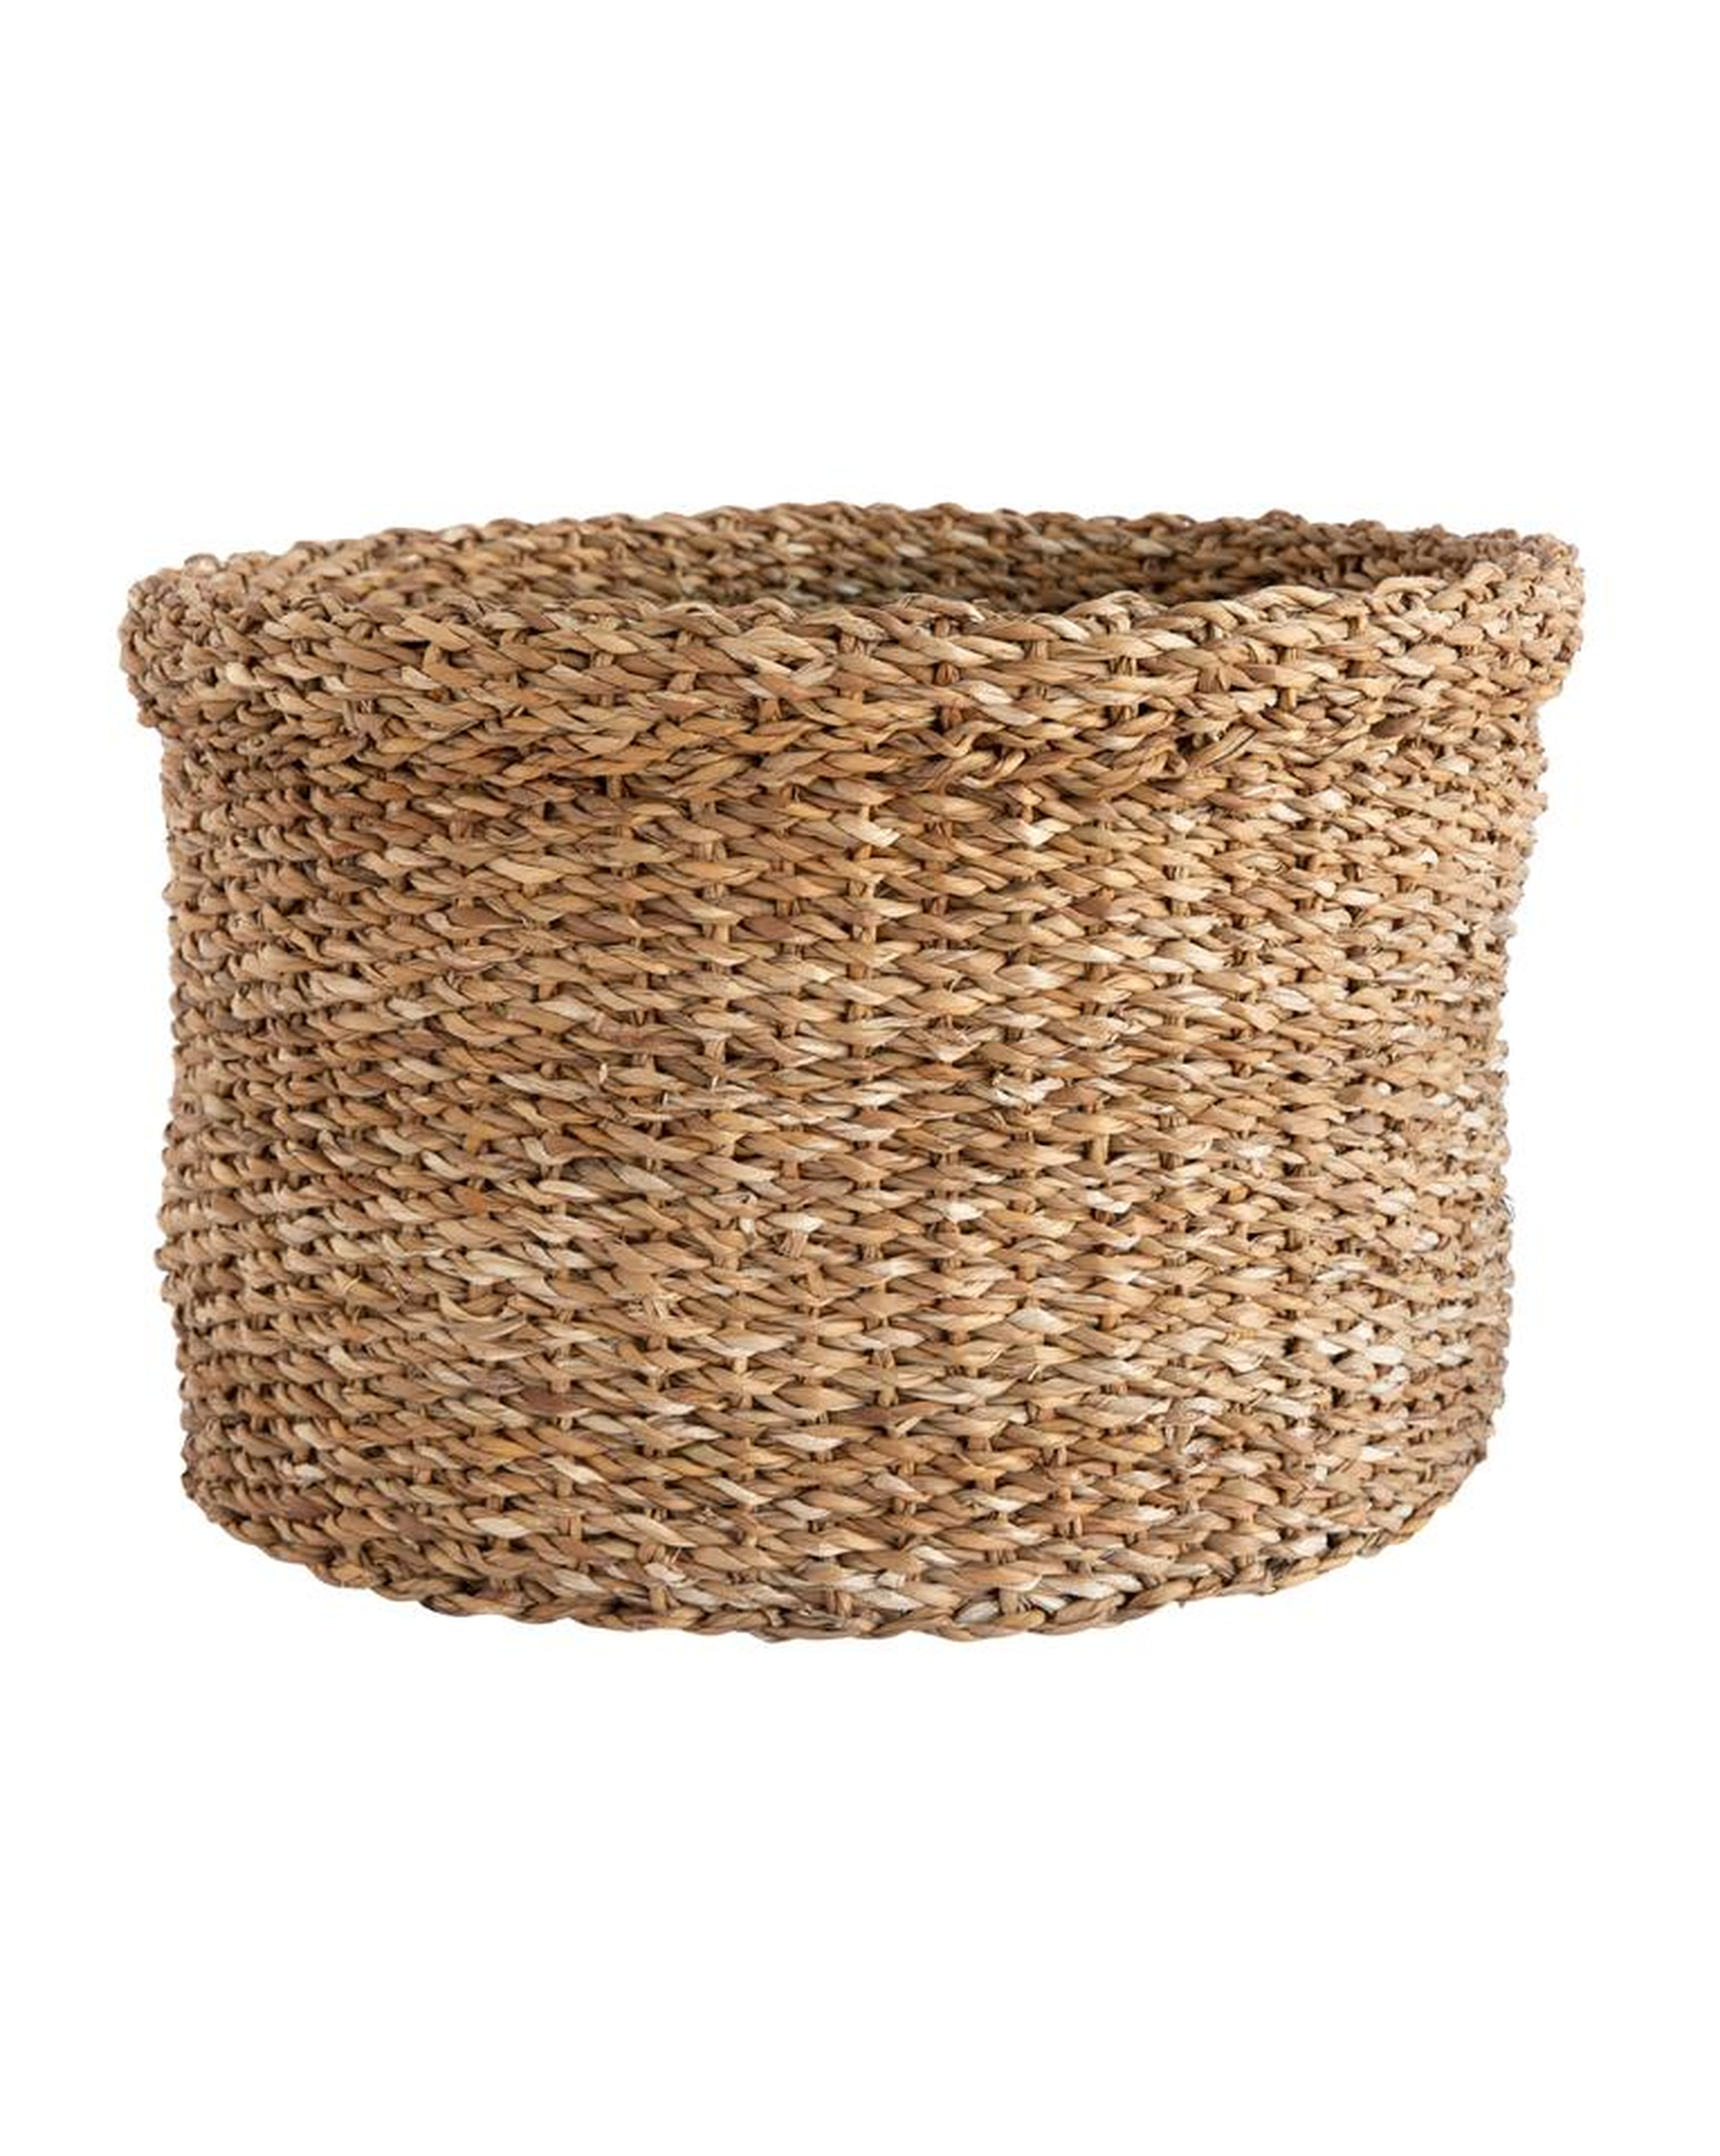 CUFFED SEAGRASS BASKET - LARGE - McGee & Co.